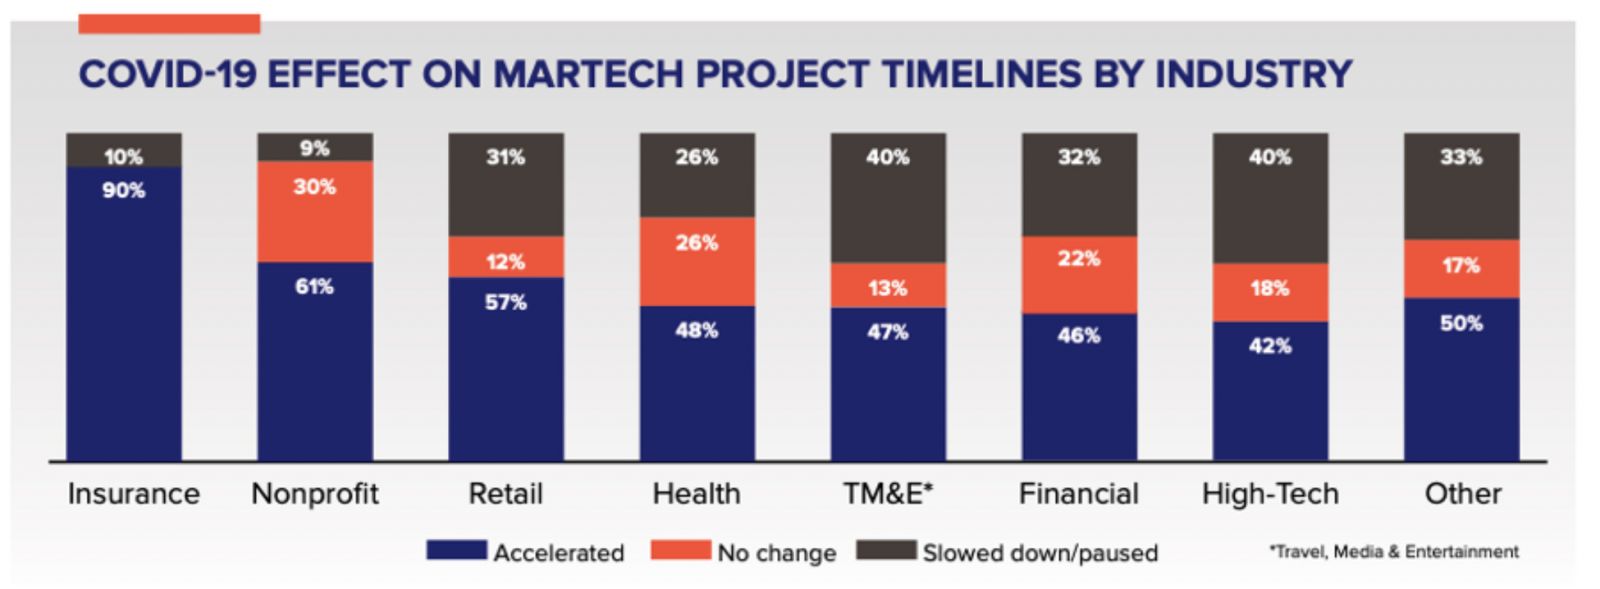 COVID-19 effect on Martech project timelines by industry infographic